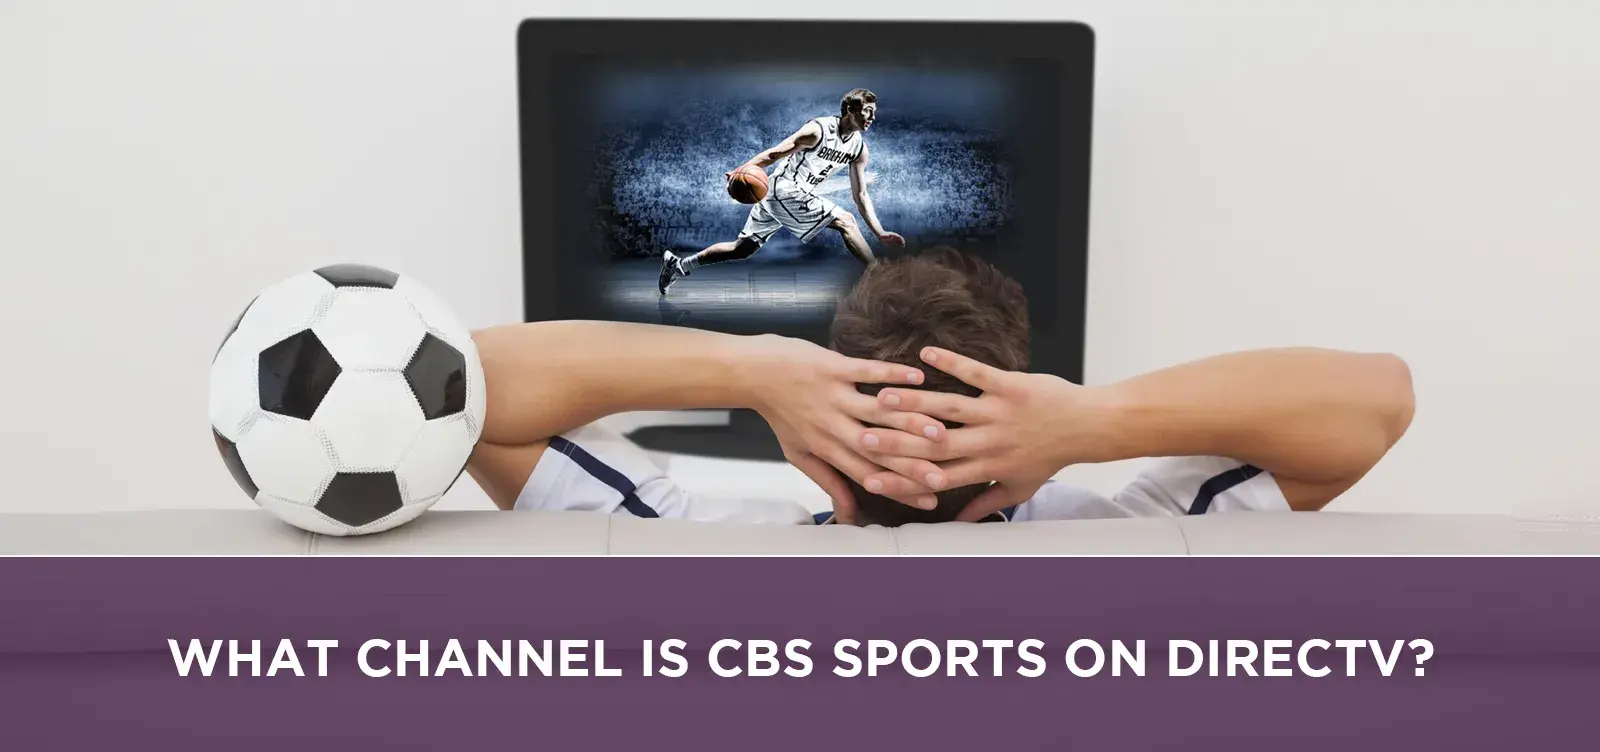 What Channel is CBS Sports on Directv